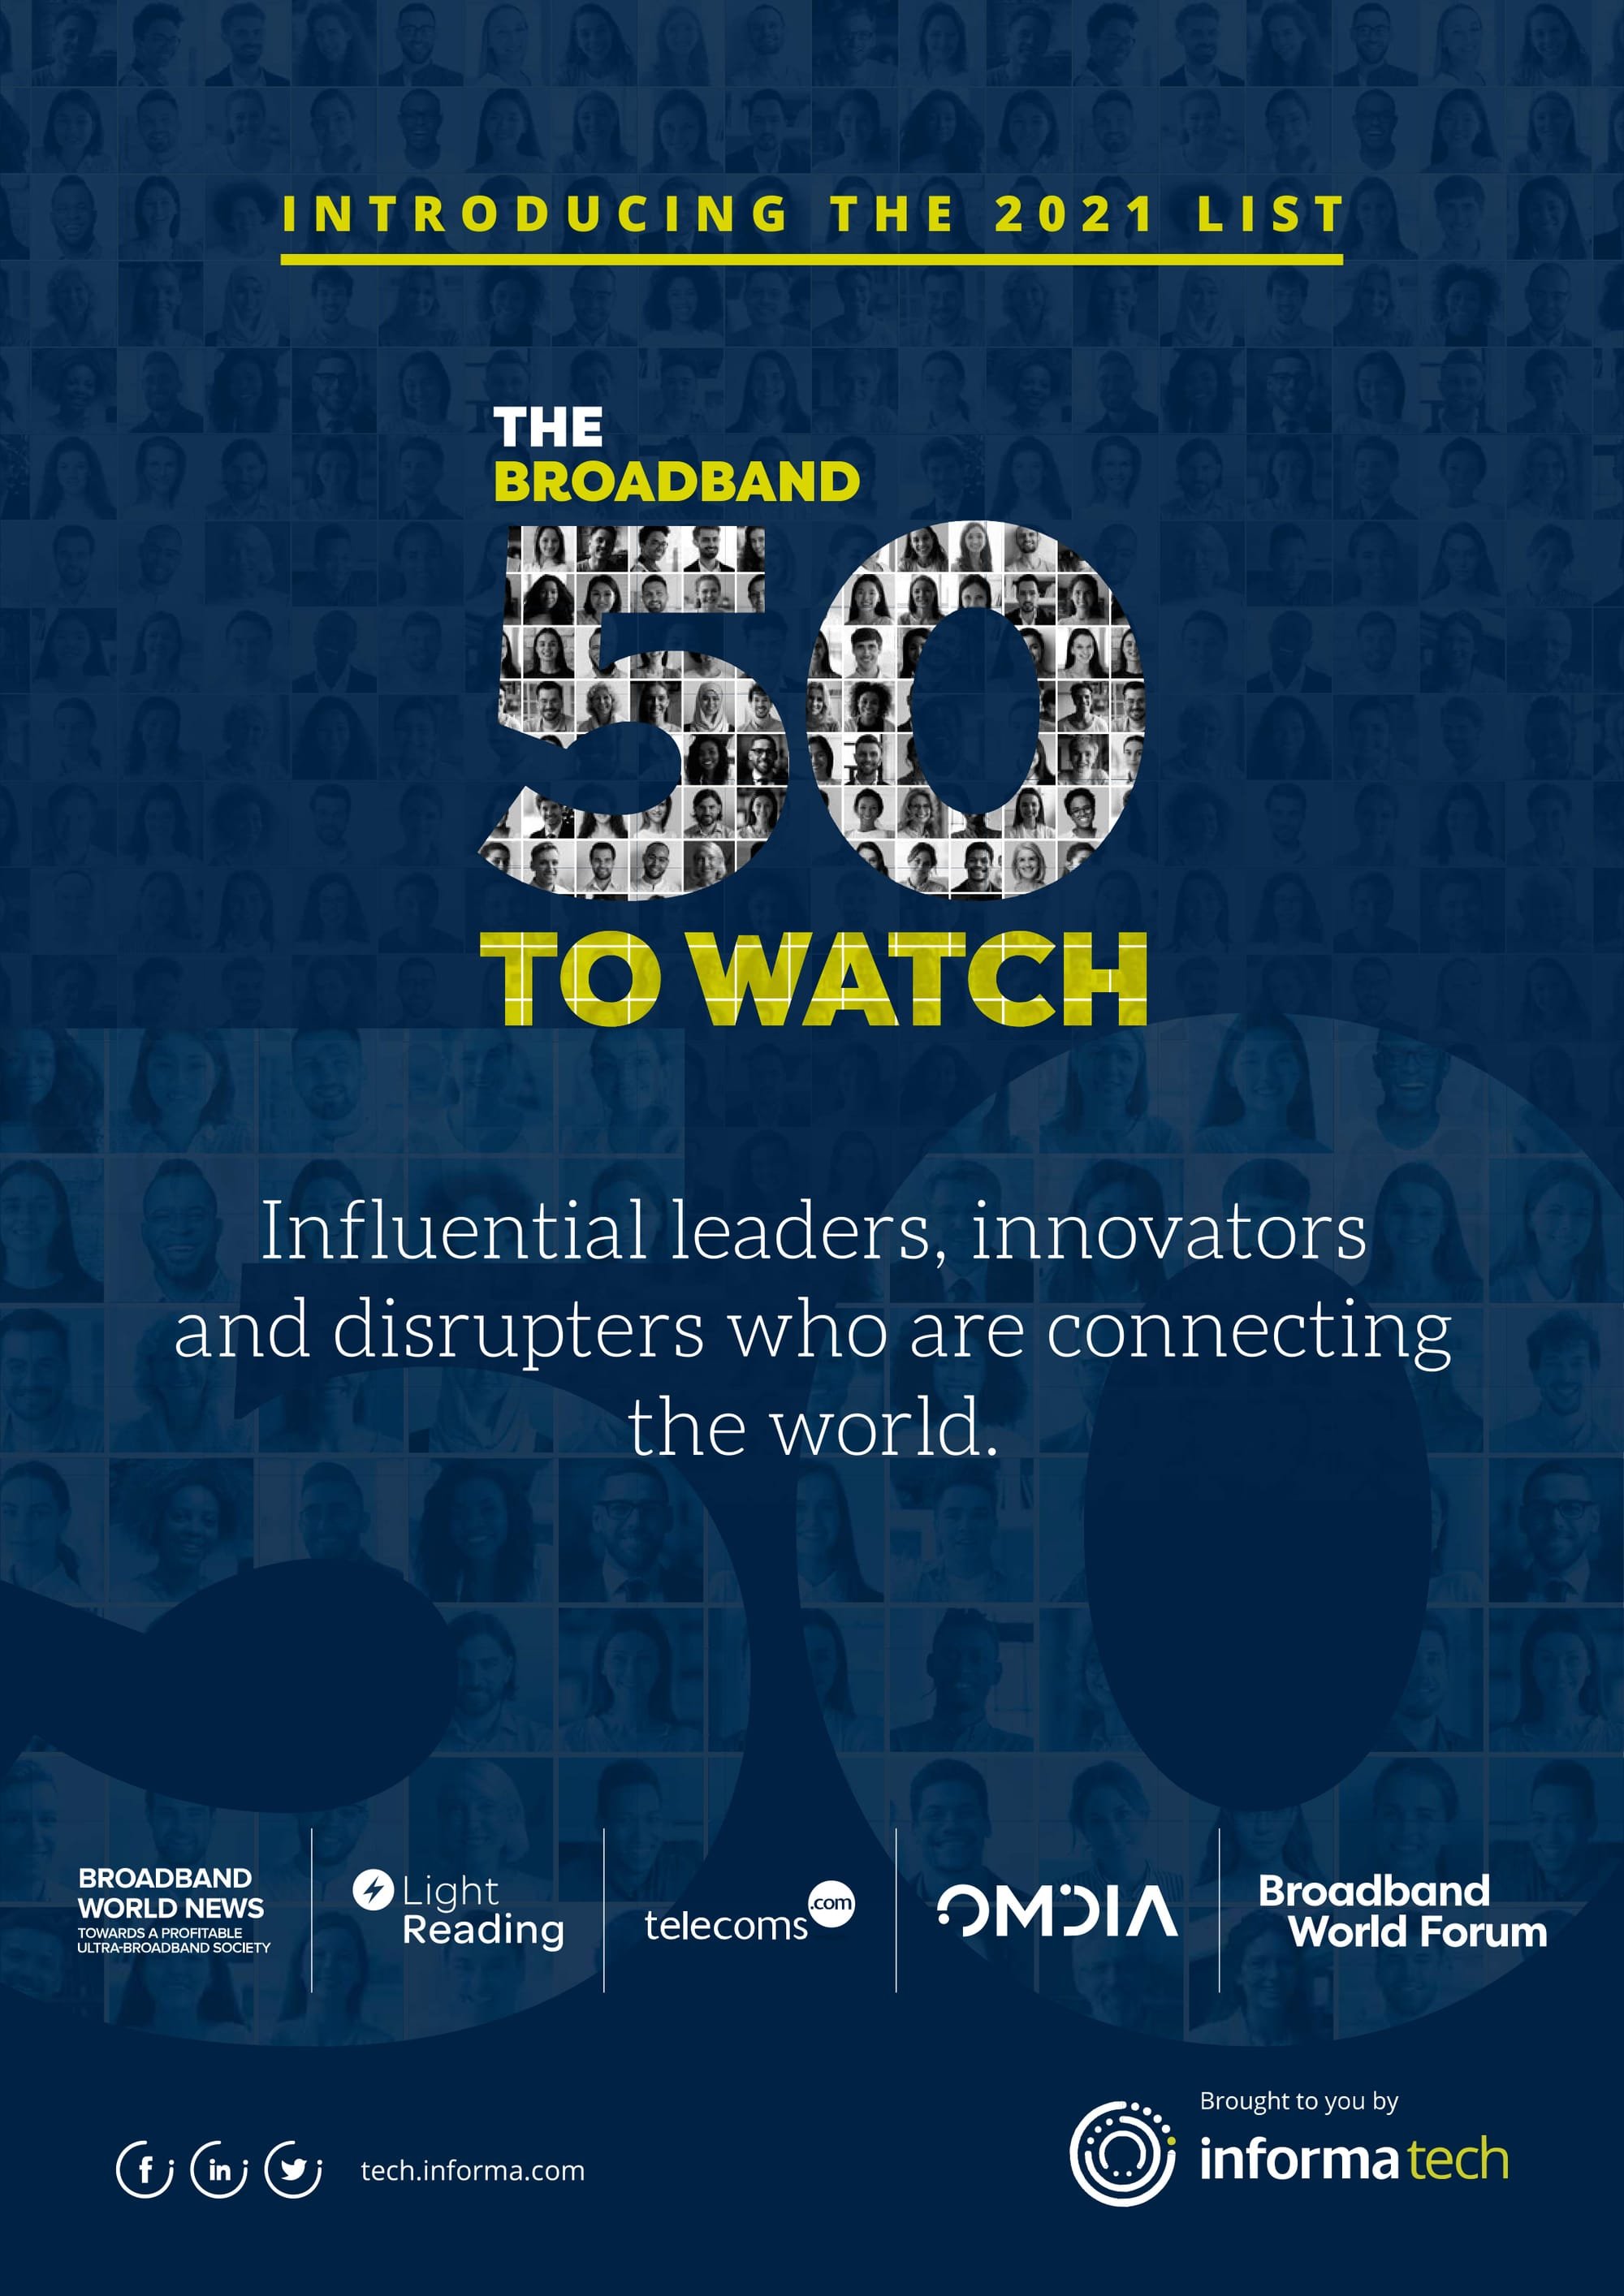 Informa Tech, Omdia and Light Reading recognise RtBrick's Richard Brandon as one of The Broadband 50 to Watch